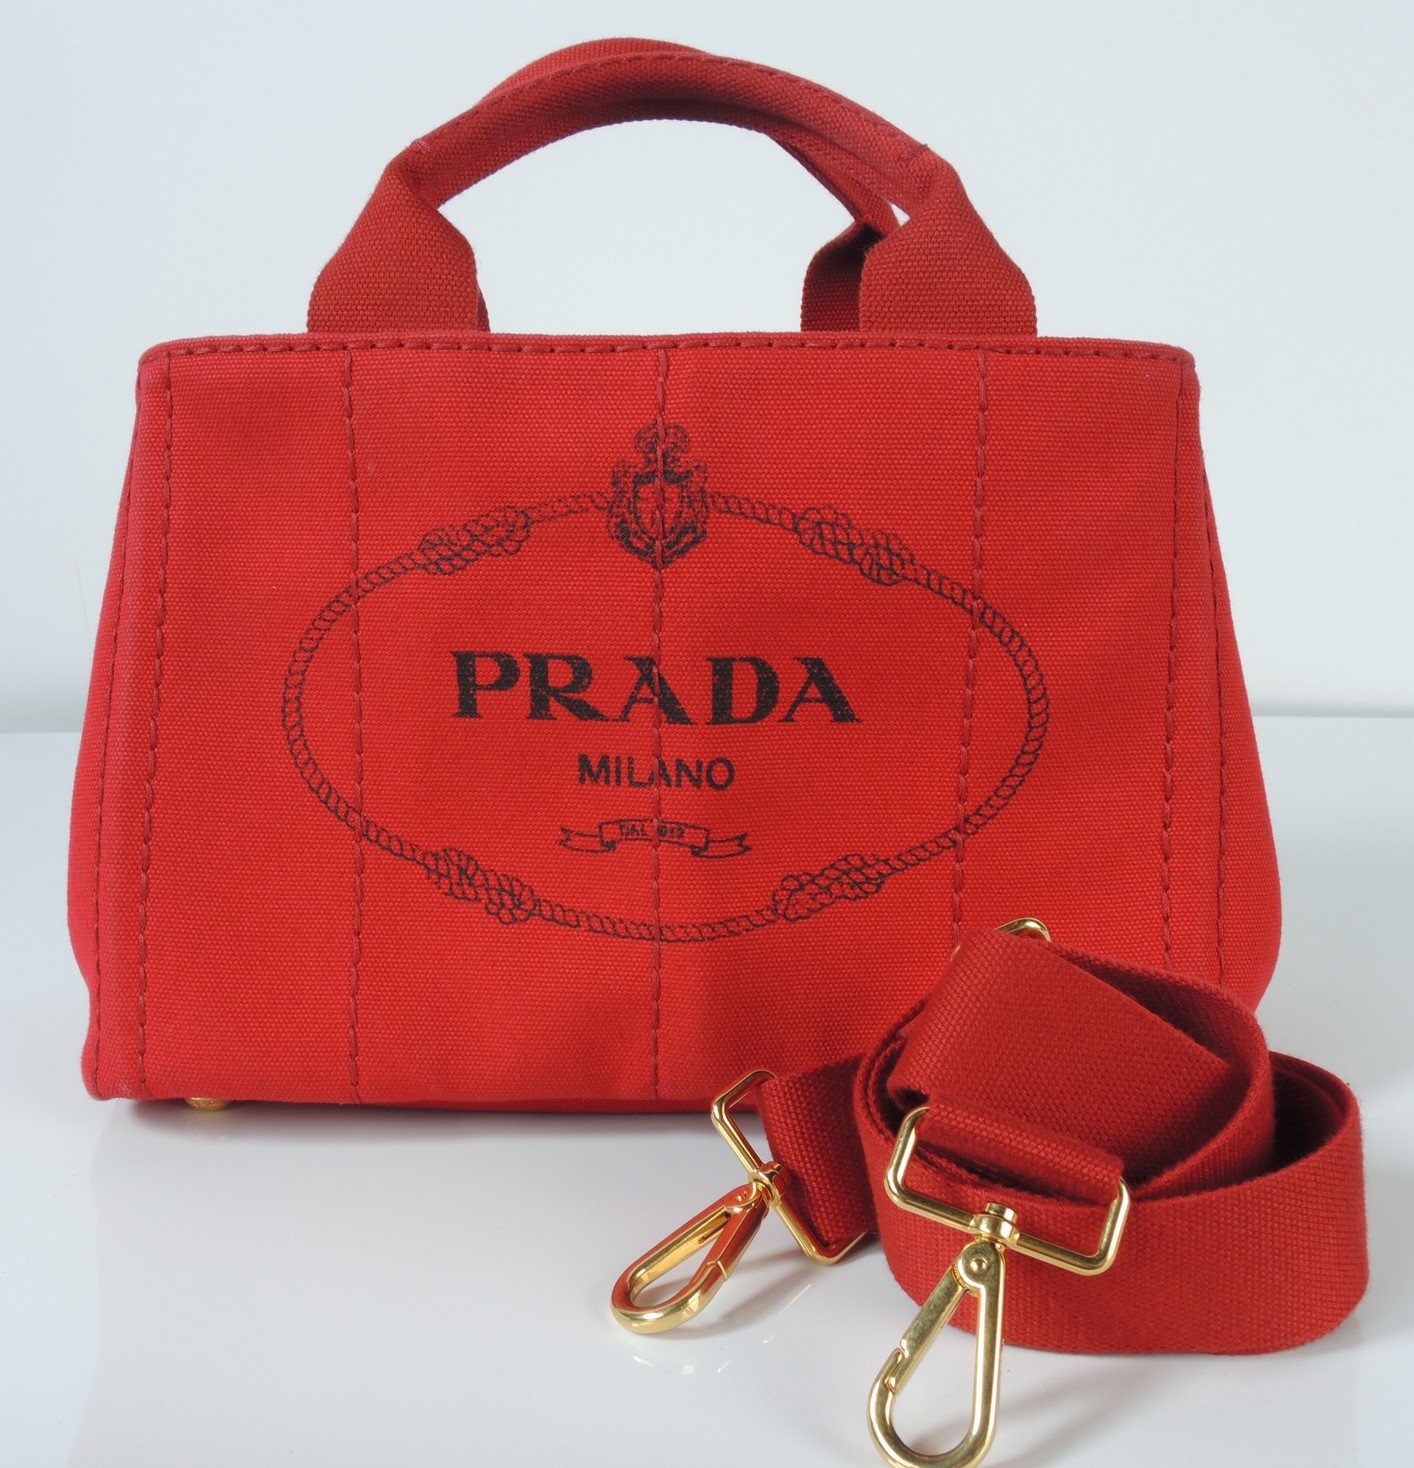 PRADA MILANO Authentic Red Leather-Canvas Shoulder Bag Purse Italy | eBay